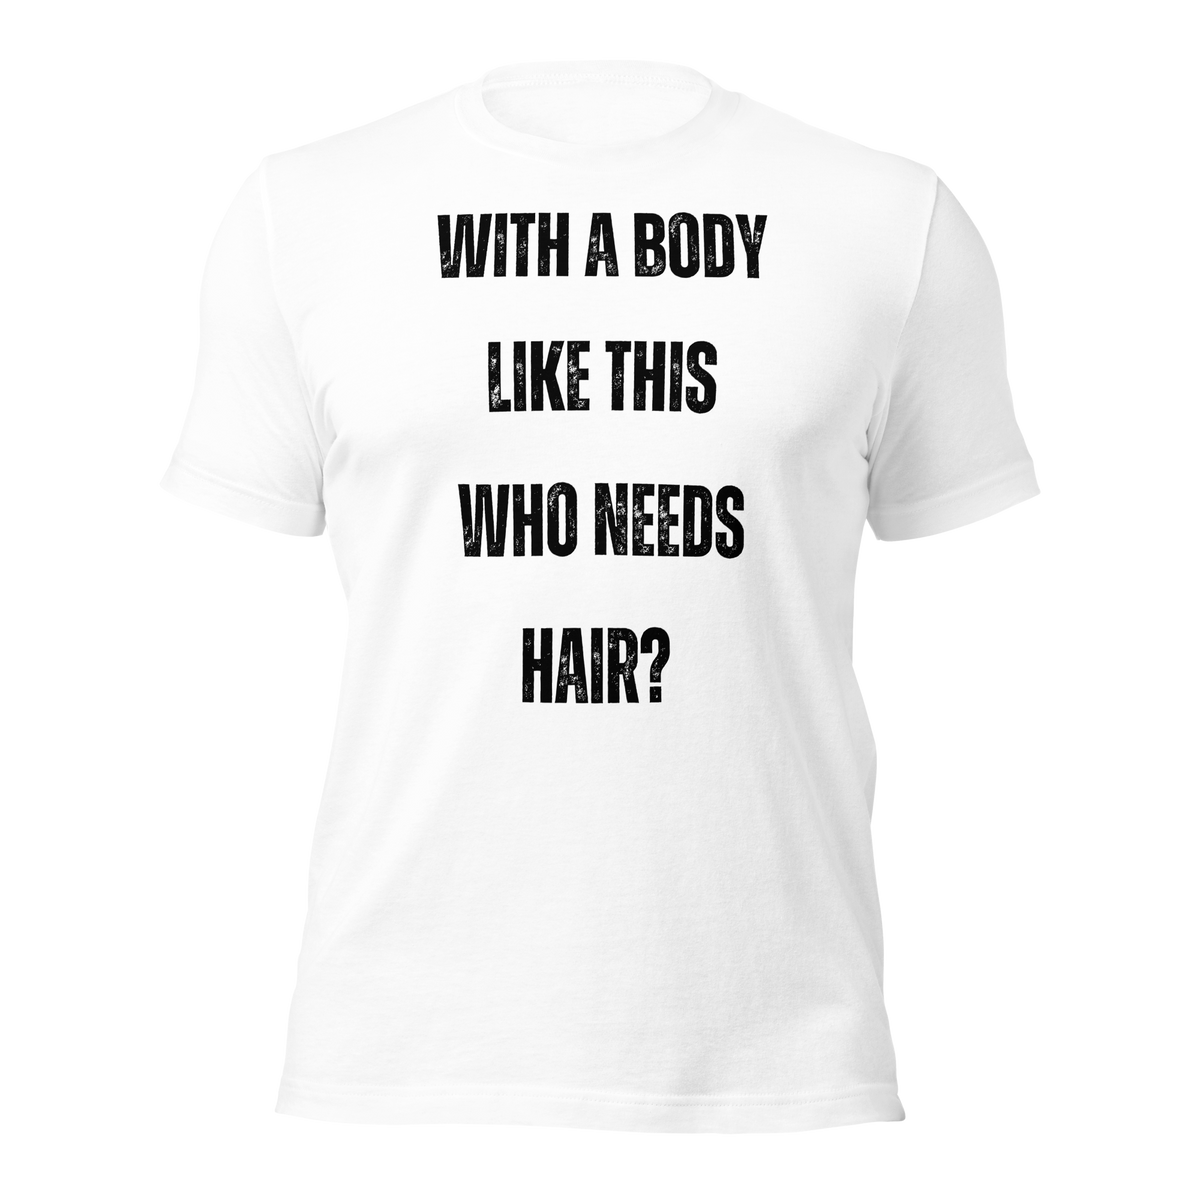 With a Body Like This Who Needs Hair, Funny Shirt for Men, Fathers Day Gift, Husband Gift, Humor Tshirt, Dad Gift, Mens Shirt, Sarcastic Tee